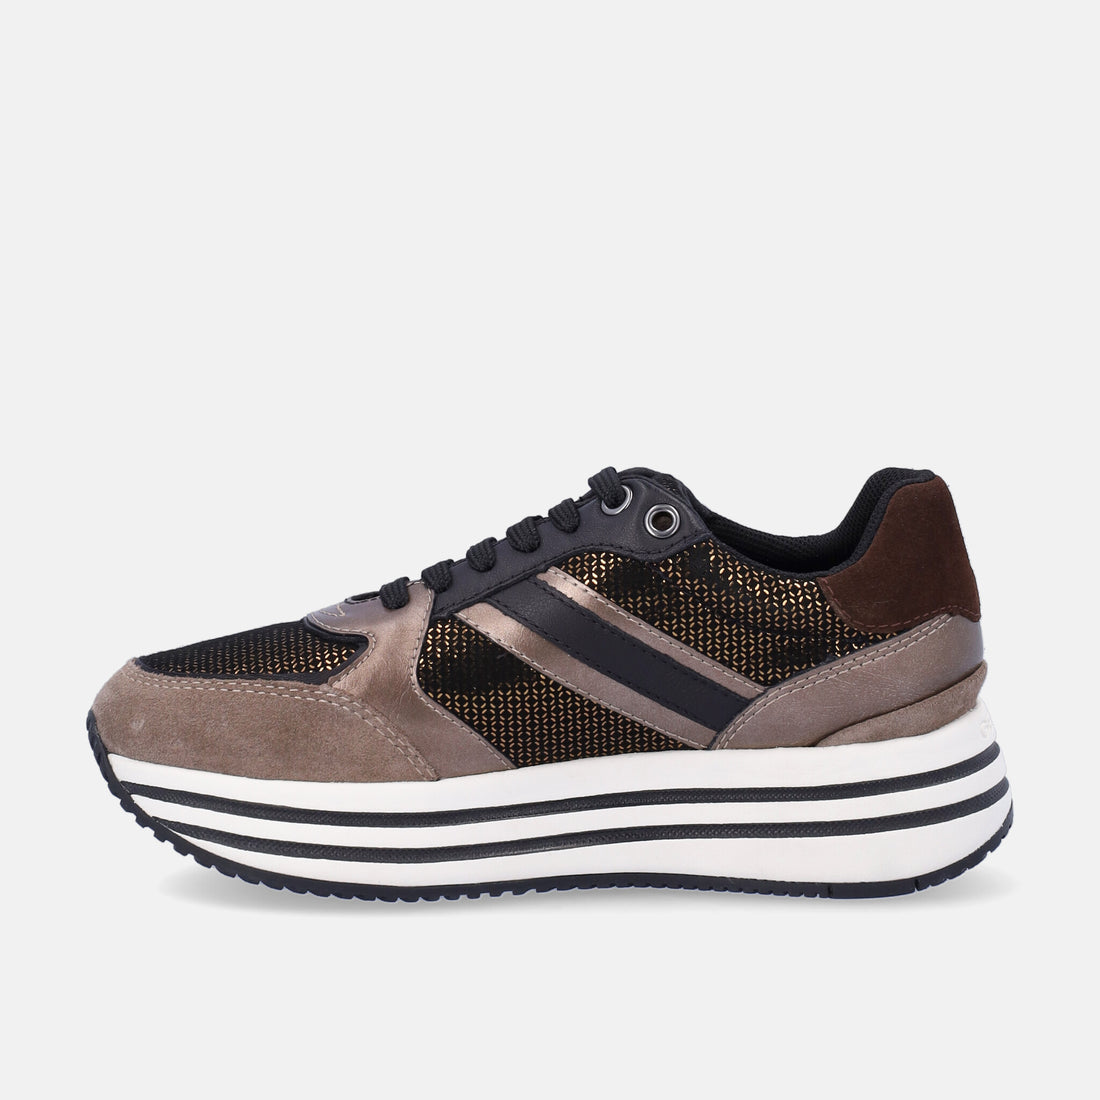 Sneakers donna Geox